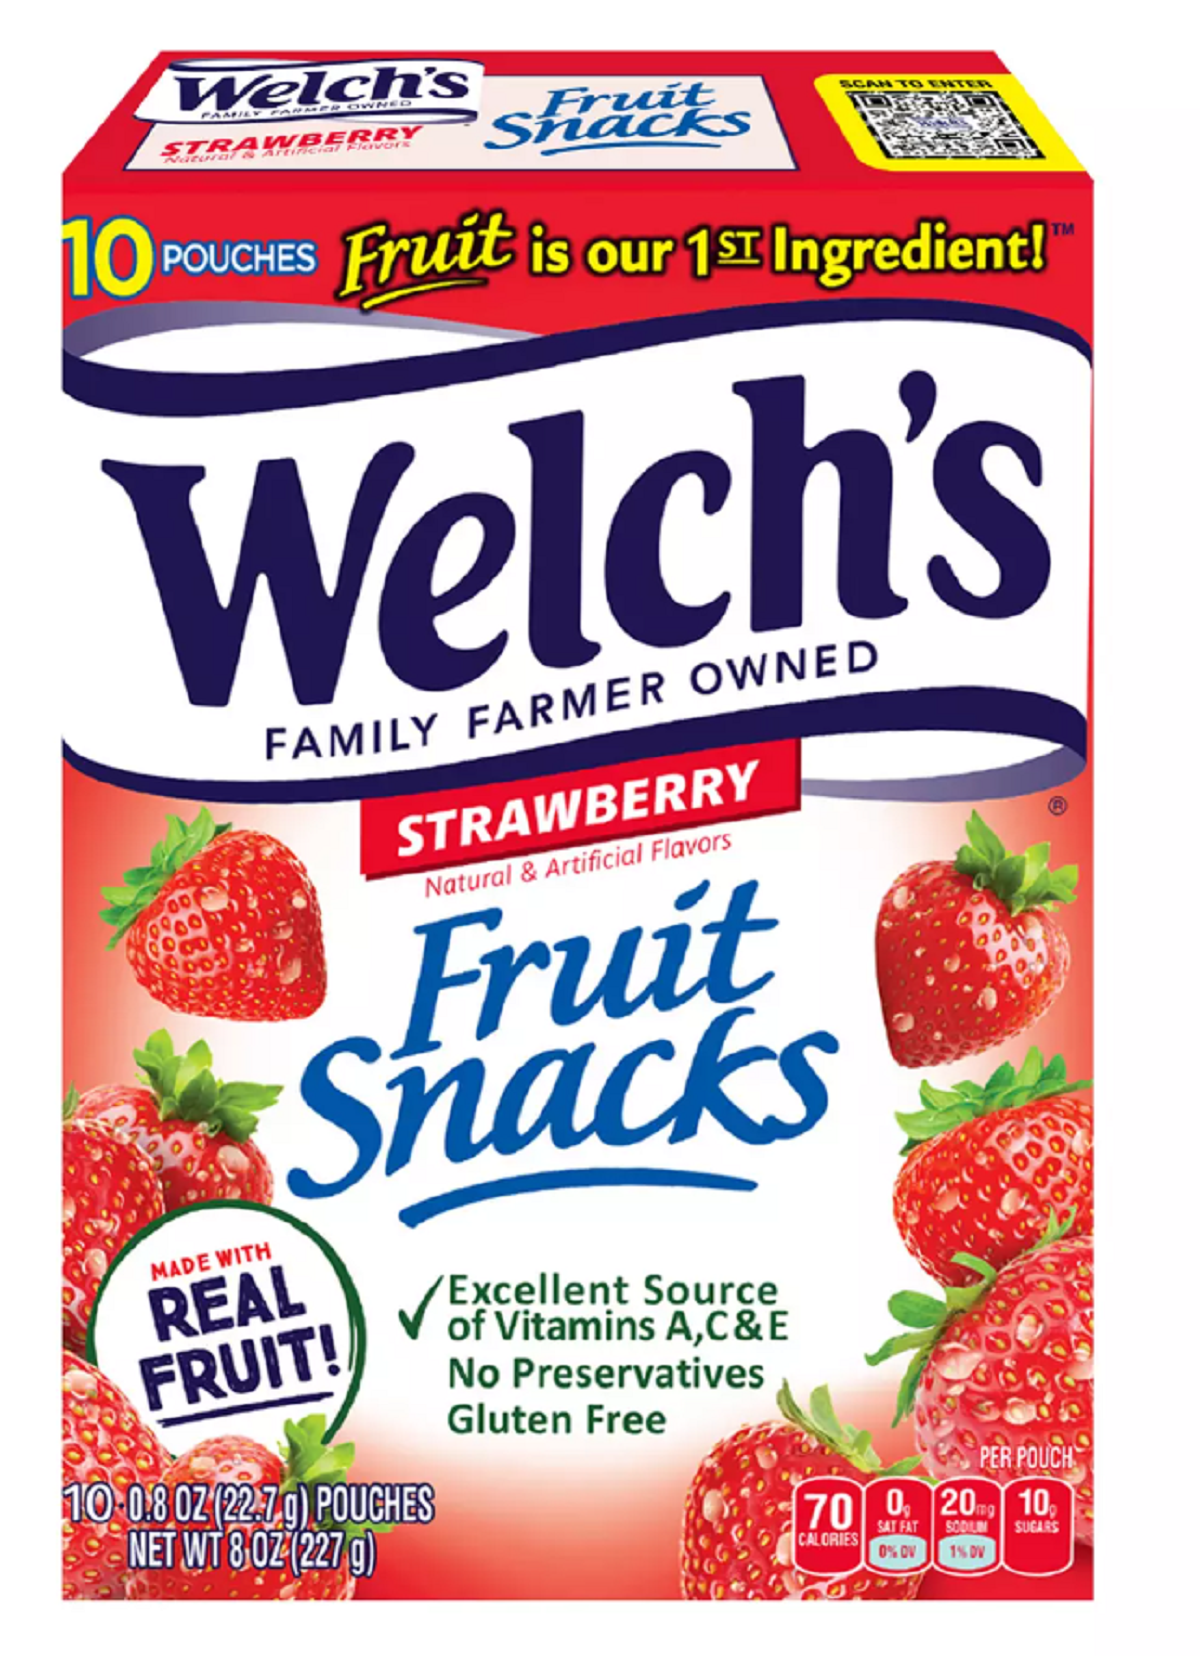 Welch's Strawberry Fruit Snacks, Welch's Fruit Snacks Printable Coupon